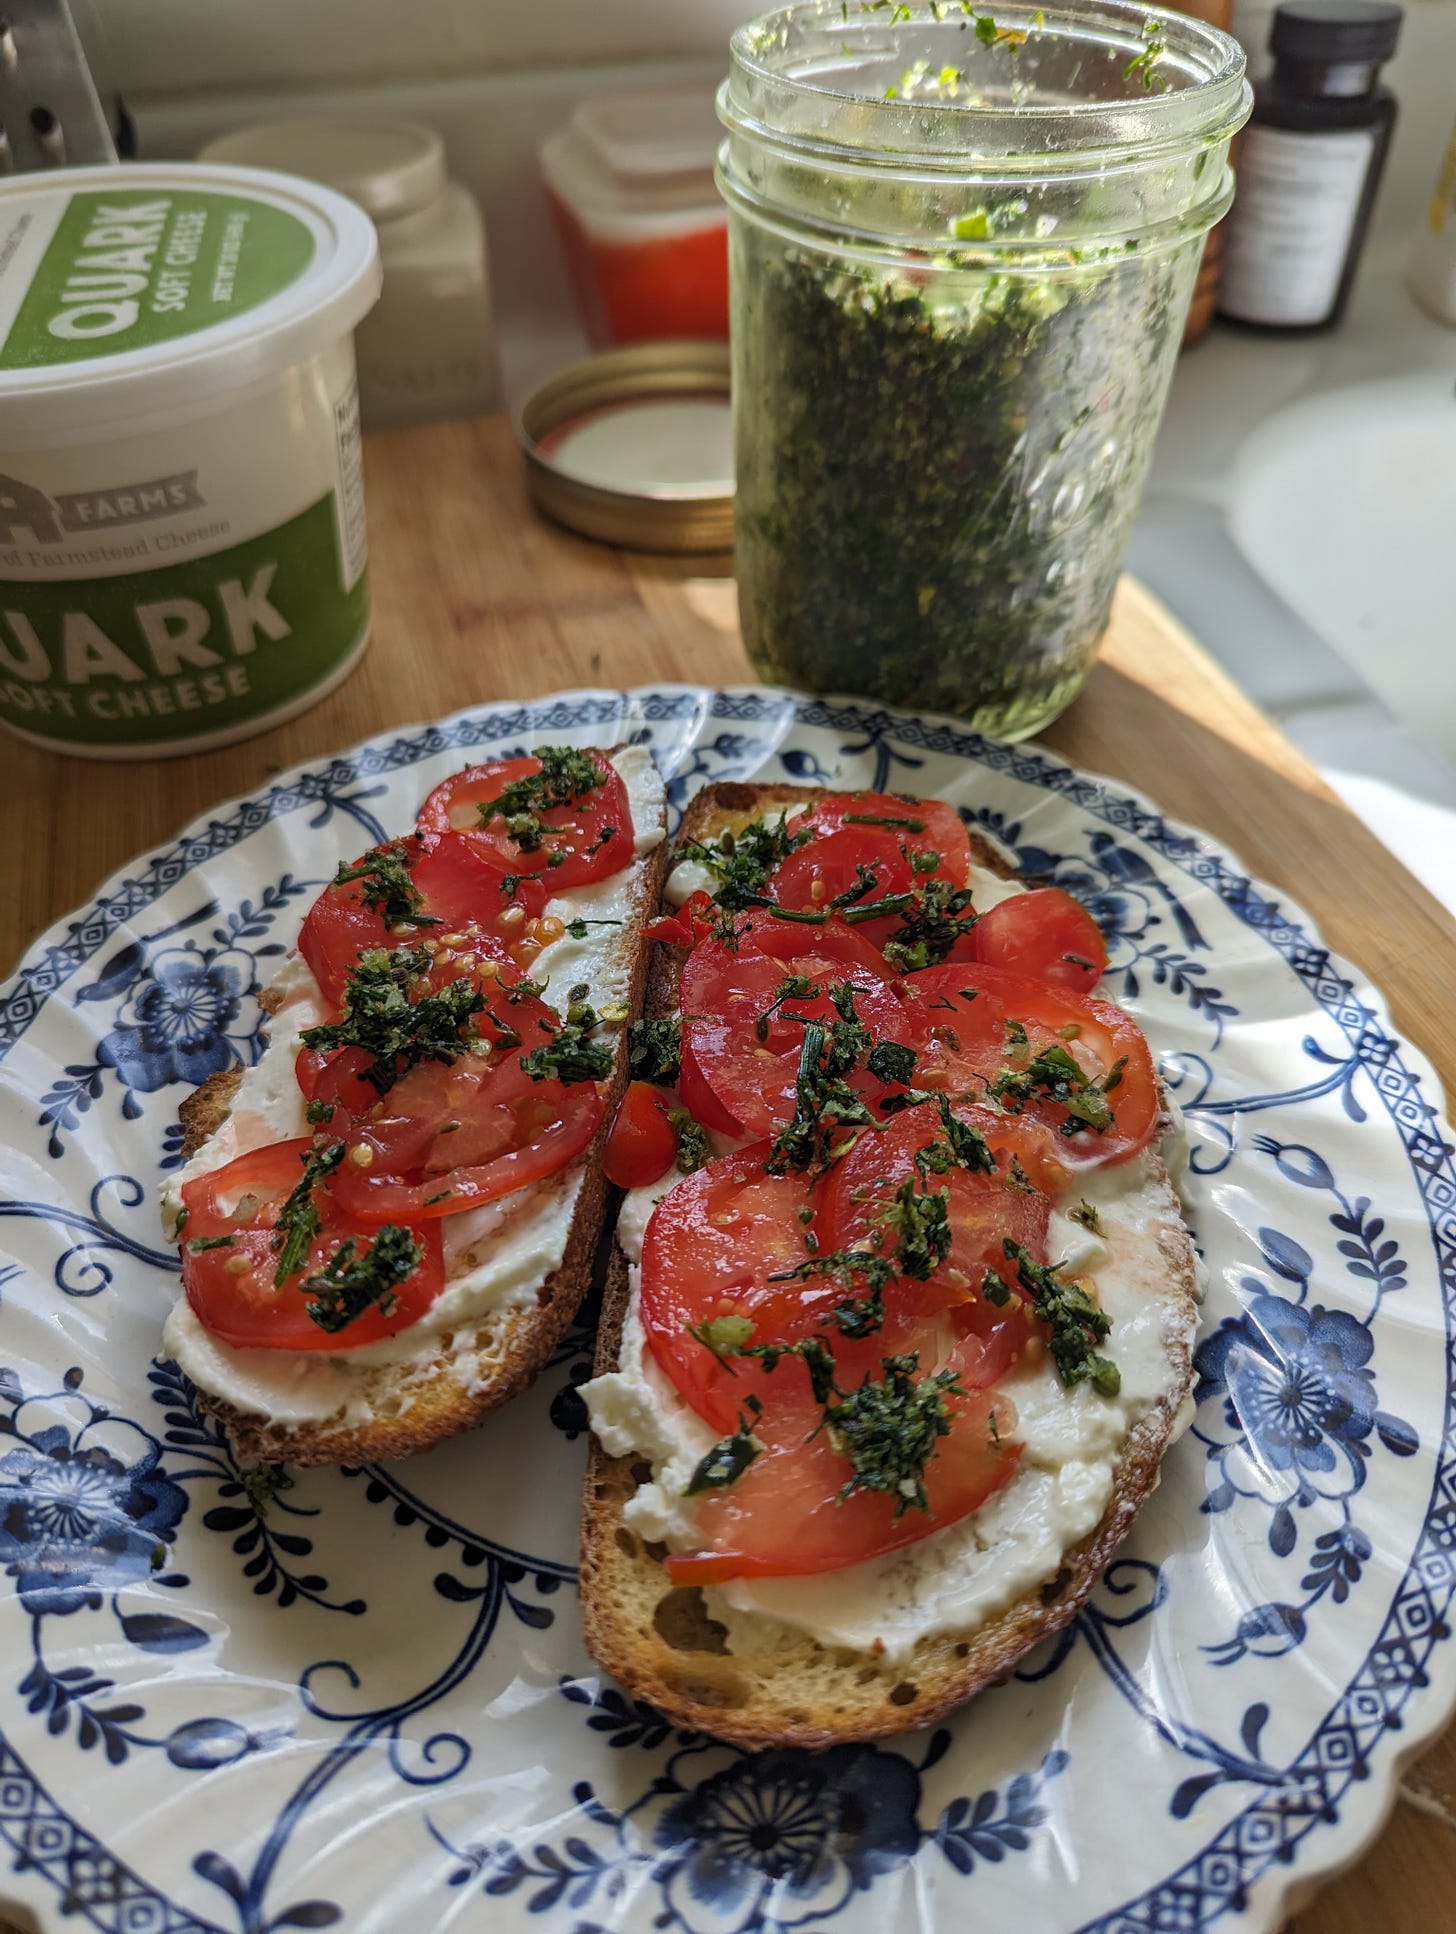 Jar of green salt and tub of Quark cheese in background. Foreground: blue and white plate with toast slices topped with quark, sliced tomatoes, and green salt. 